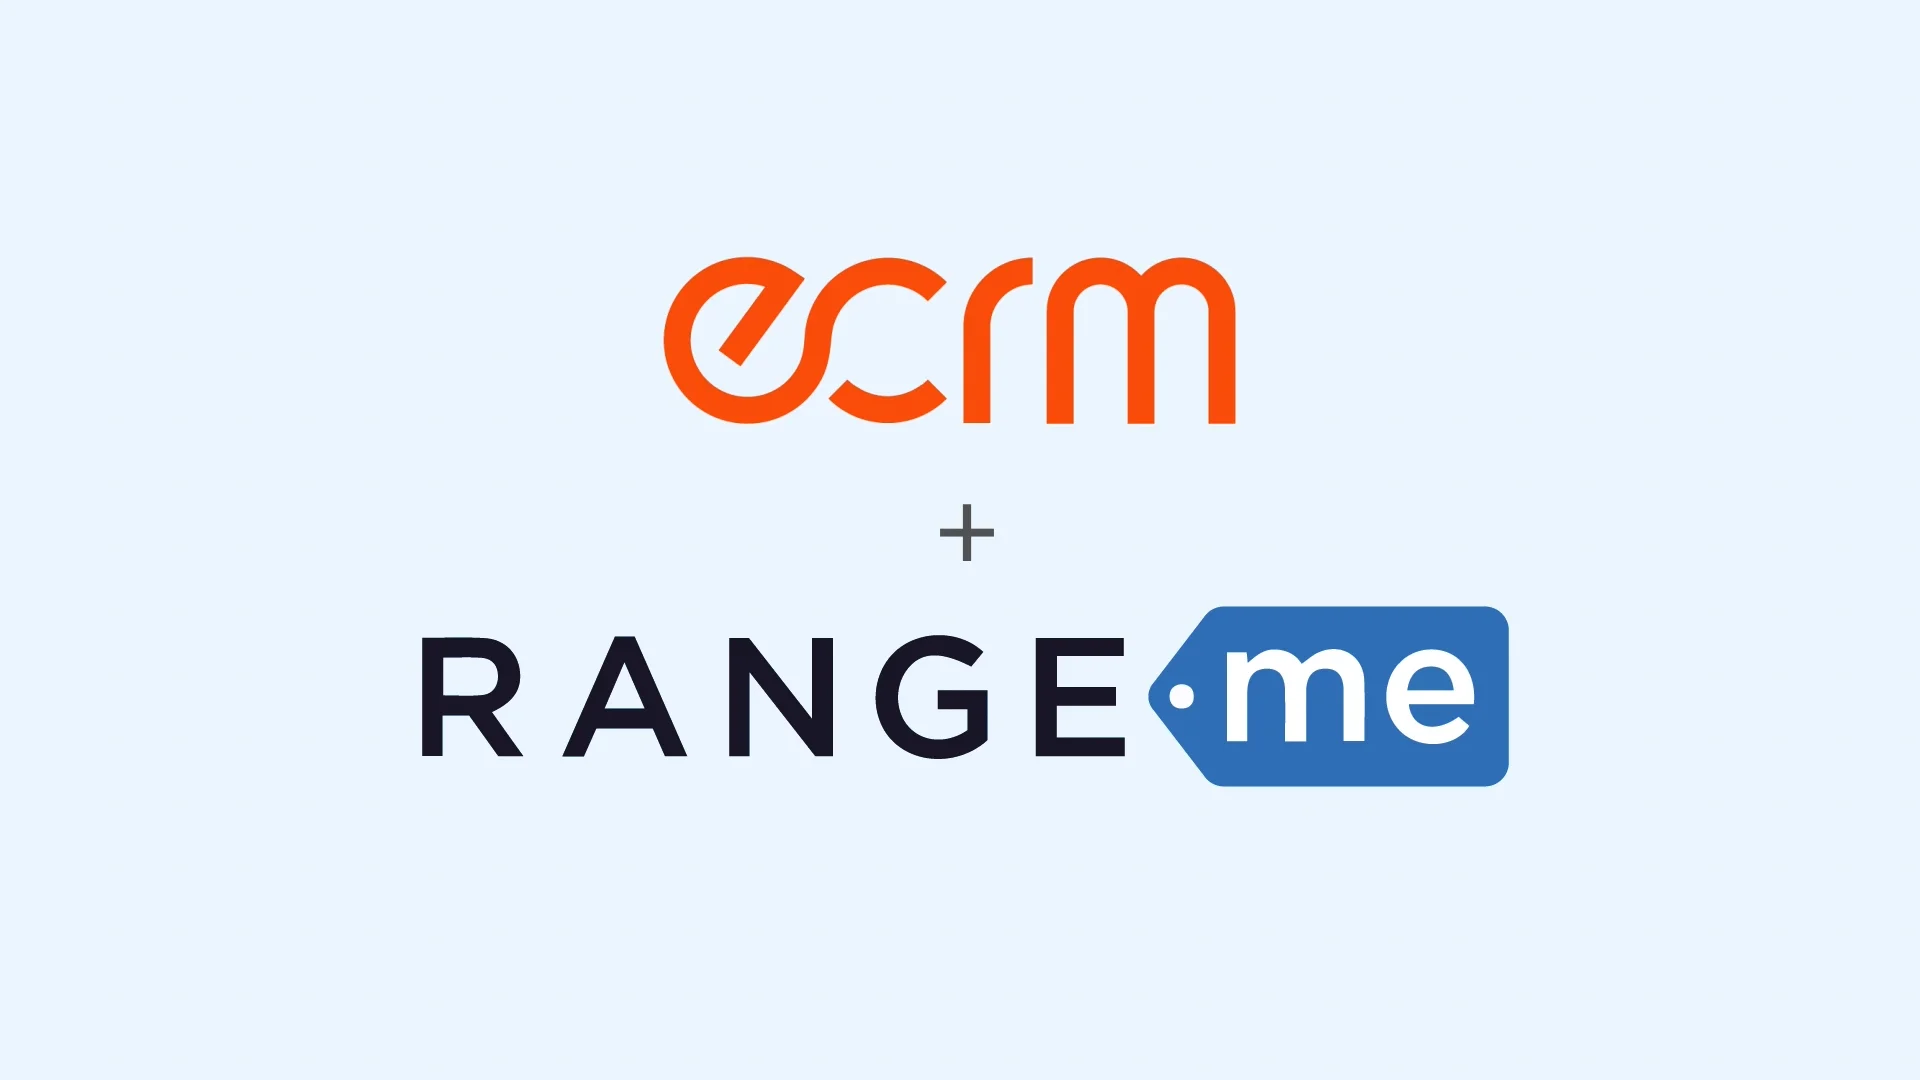 RangeMe Premium/Pro + ECRM Sessions + A Limited-Time Offer! on Vimeo